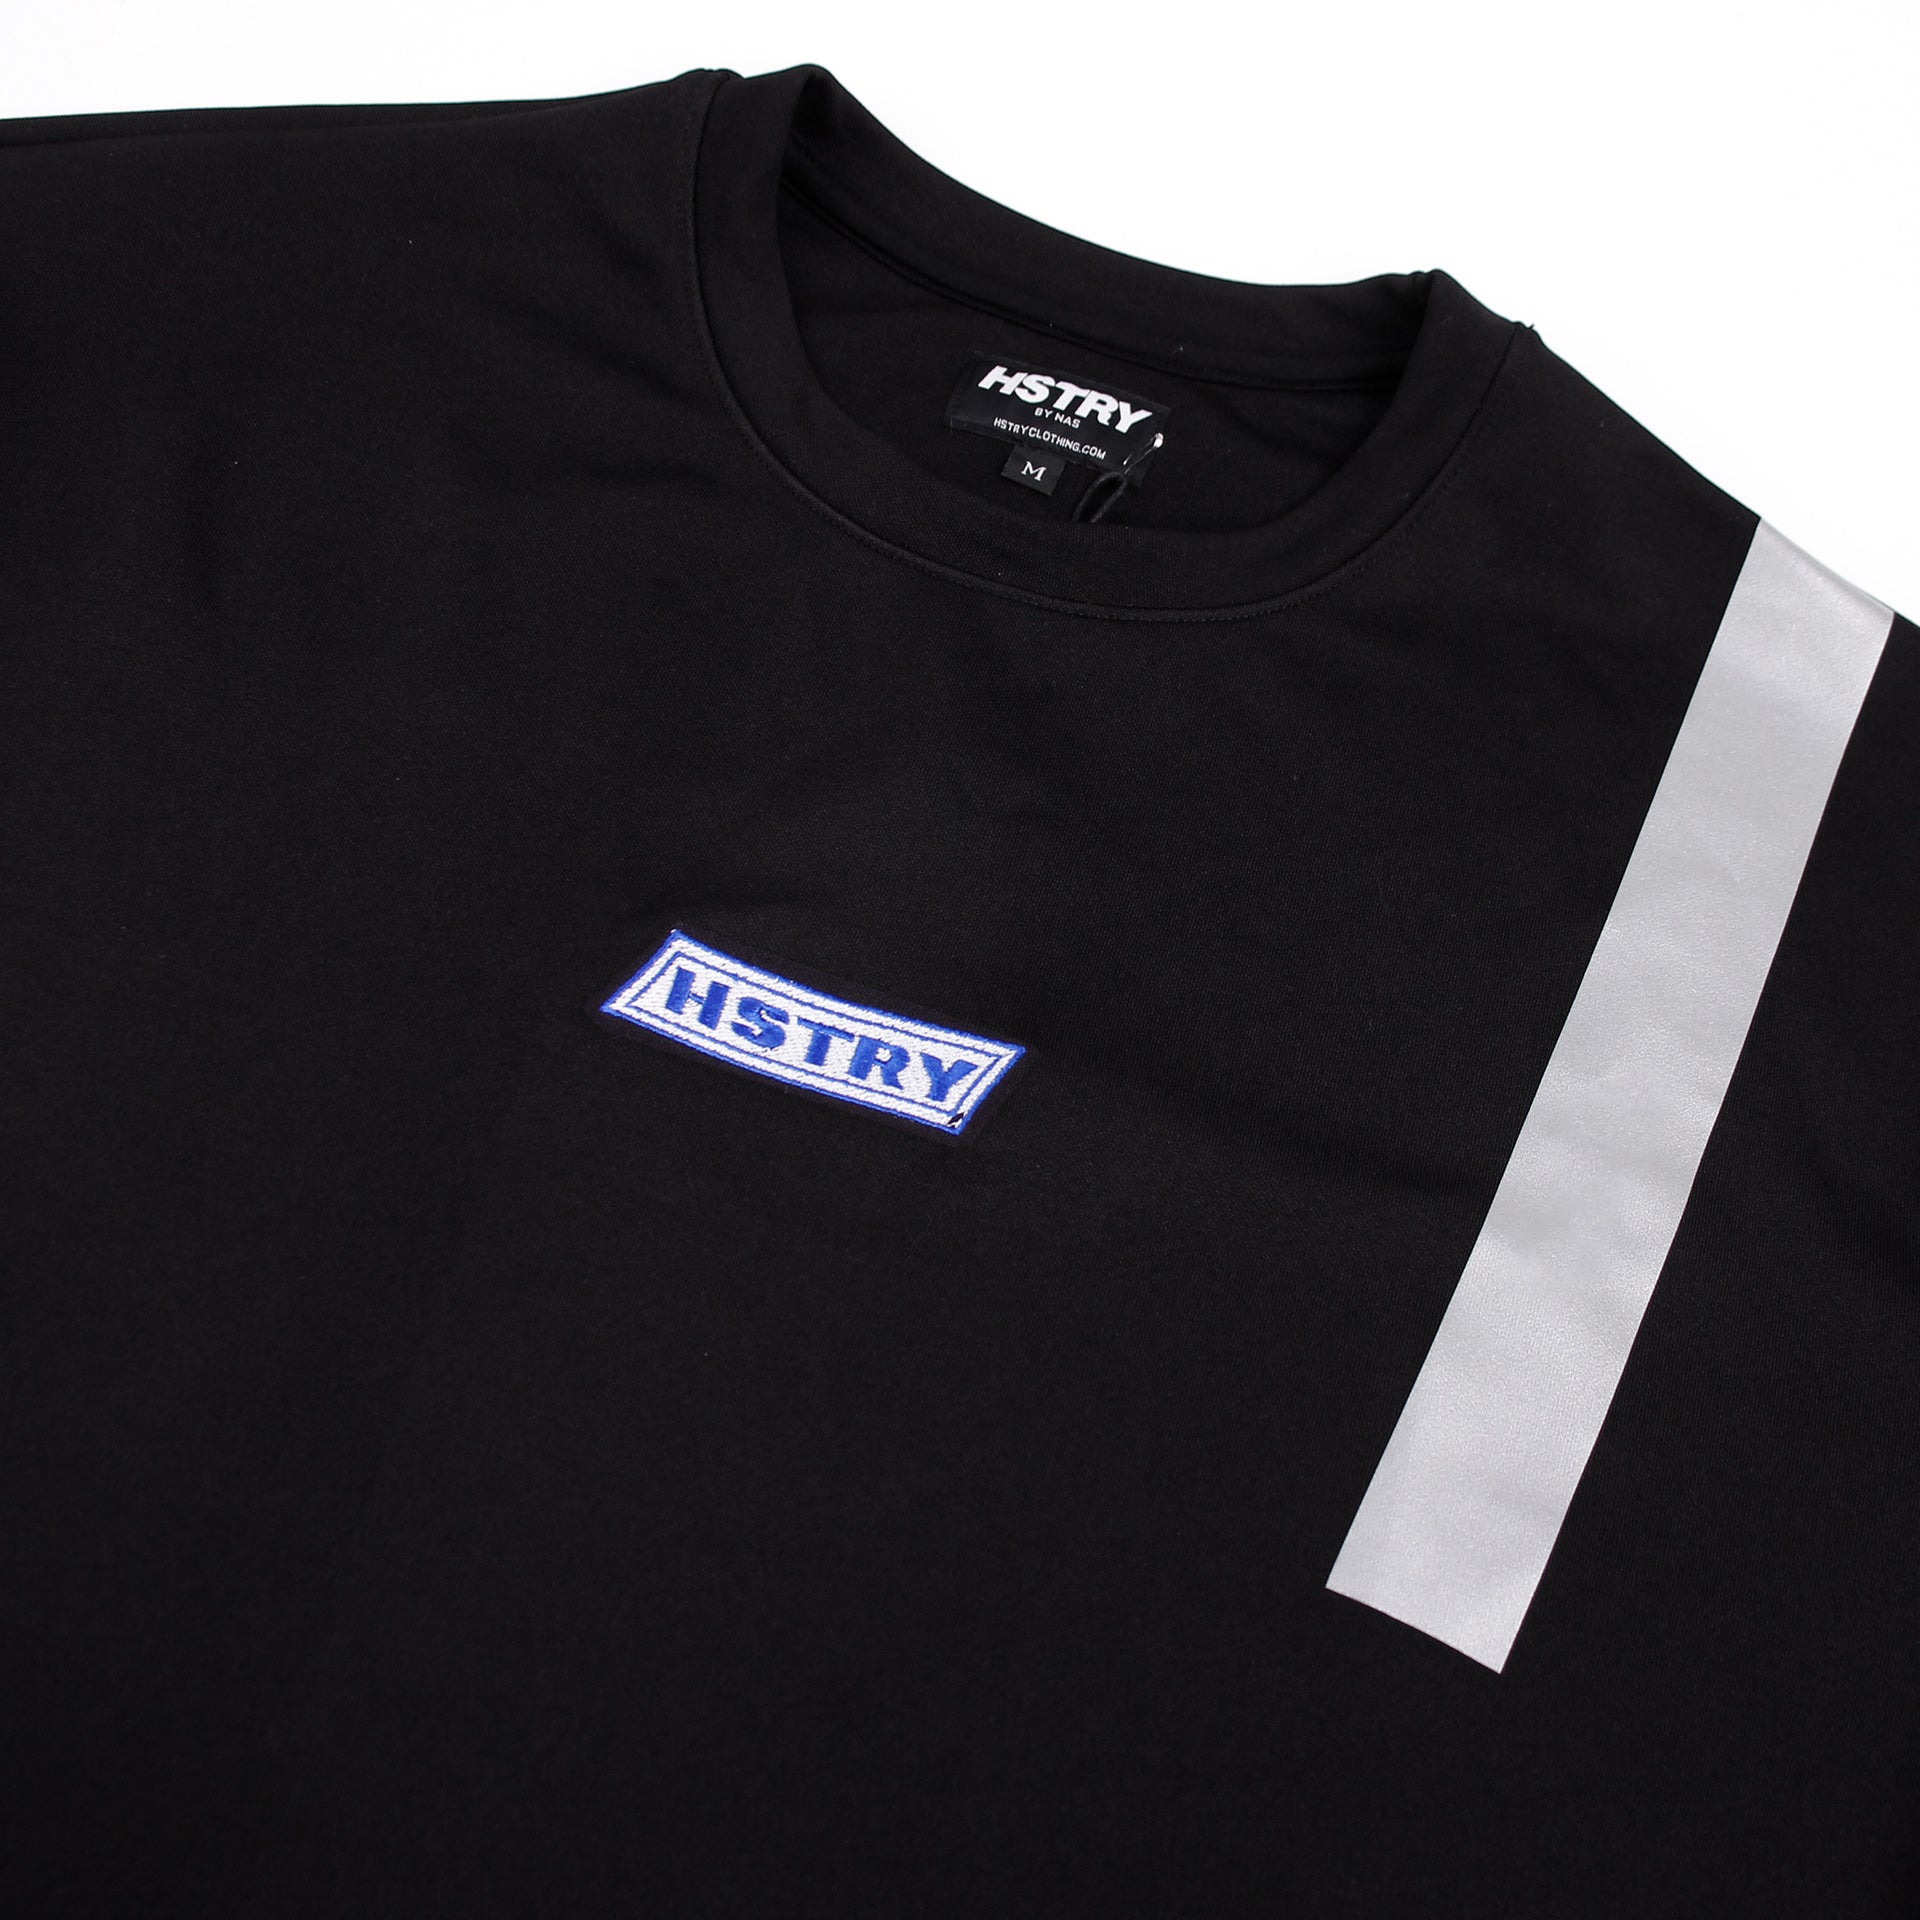 3M REFLECTIVE TAPE TEE – HSTRY CLOTHING